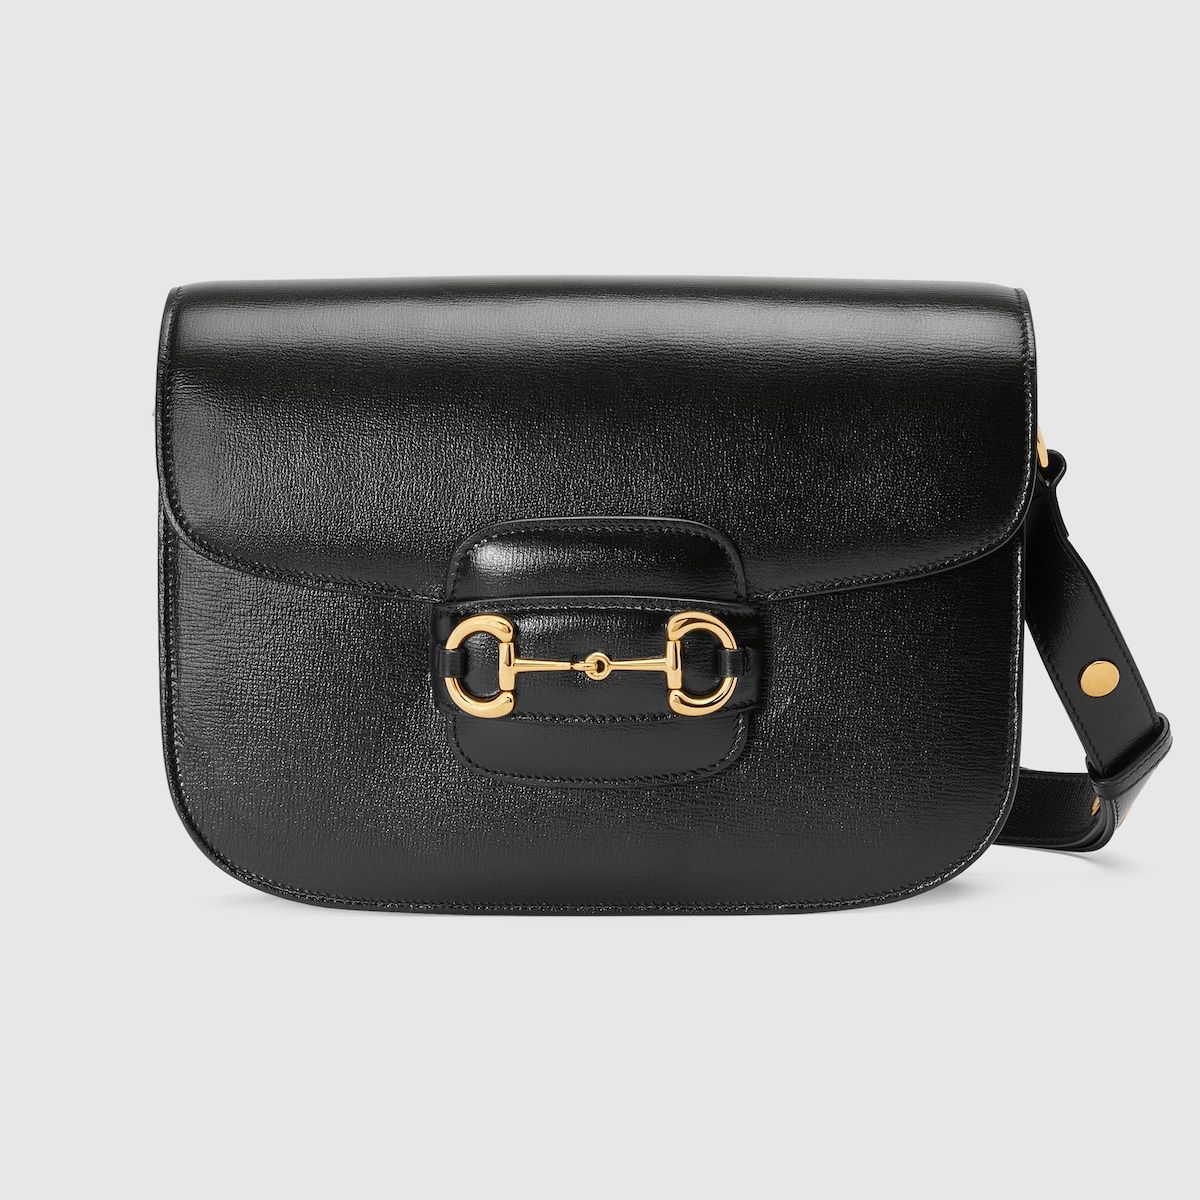 <p><strong>$3250.00</strong></p><p><a href="https://go.redirectingat.com?id=74968X1553576&url=https%3A%2F%2Fwww.gucci.com%2Fus%2Fen%2Fpr%2Fwomen%2Fhandbags%2Fshoulder-bags-for-women%2Fgucci-horsebit-1955-shoulder-bag-p-6022041DB0G1000&sref=https%3A%2F%2Fwww.townandcountrymag.com%2Fstyle%2Ffashion-trends%2Fg44518138%2Fbest-crossbody-bags-for-travel%2F">Shop Now</a></p><p><a href="https://www.townandcountrymag.com/style/fashion-trends/a42758533/gucci-horsebit-1995-shoulder-bag-review/">Gucci's iconic Horsebit Bag</a> is certainly a splurge, but a classic you'll get use out of for years to come. It has a structured silhouette that never loses its a shape, a secure frontal flap that allows you to easily access your belongings, and perhaps most importantly, an adjustable strap that can turn the shoulder bag into a crossbody or vice versa. Oh, and how about that discreet gold horsebit hardware? Sleek as they came. As <em>T&C'</em>s Deputy Digital Lifestyle Editor Roxanne Adamiyatt puts it, "it's a wear-to-anything-and-everywhere-piece that manages to still feel special every time I put it over my shoulder." </p><p><strong>Dimensions: </strong>9.8"W x 7"H x 3.1"D</p>